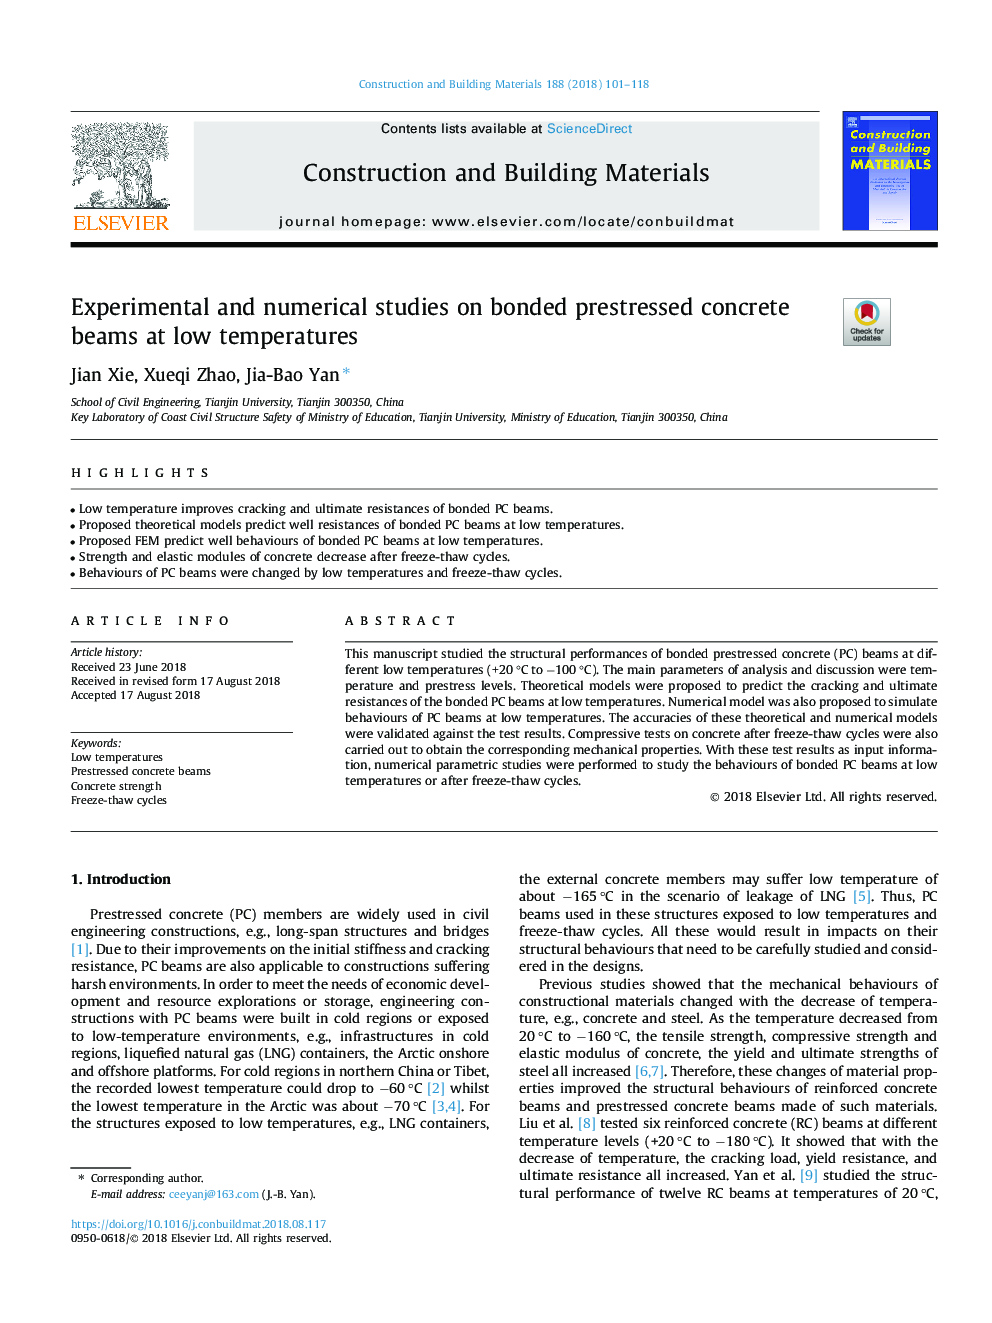 Experimental and numerical studies on bonded prestressed concrete beams at low temperatures